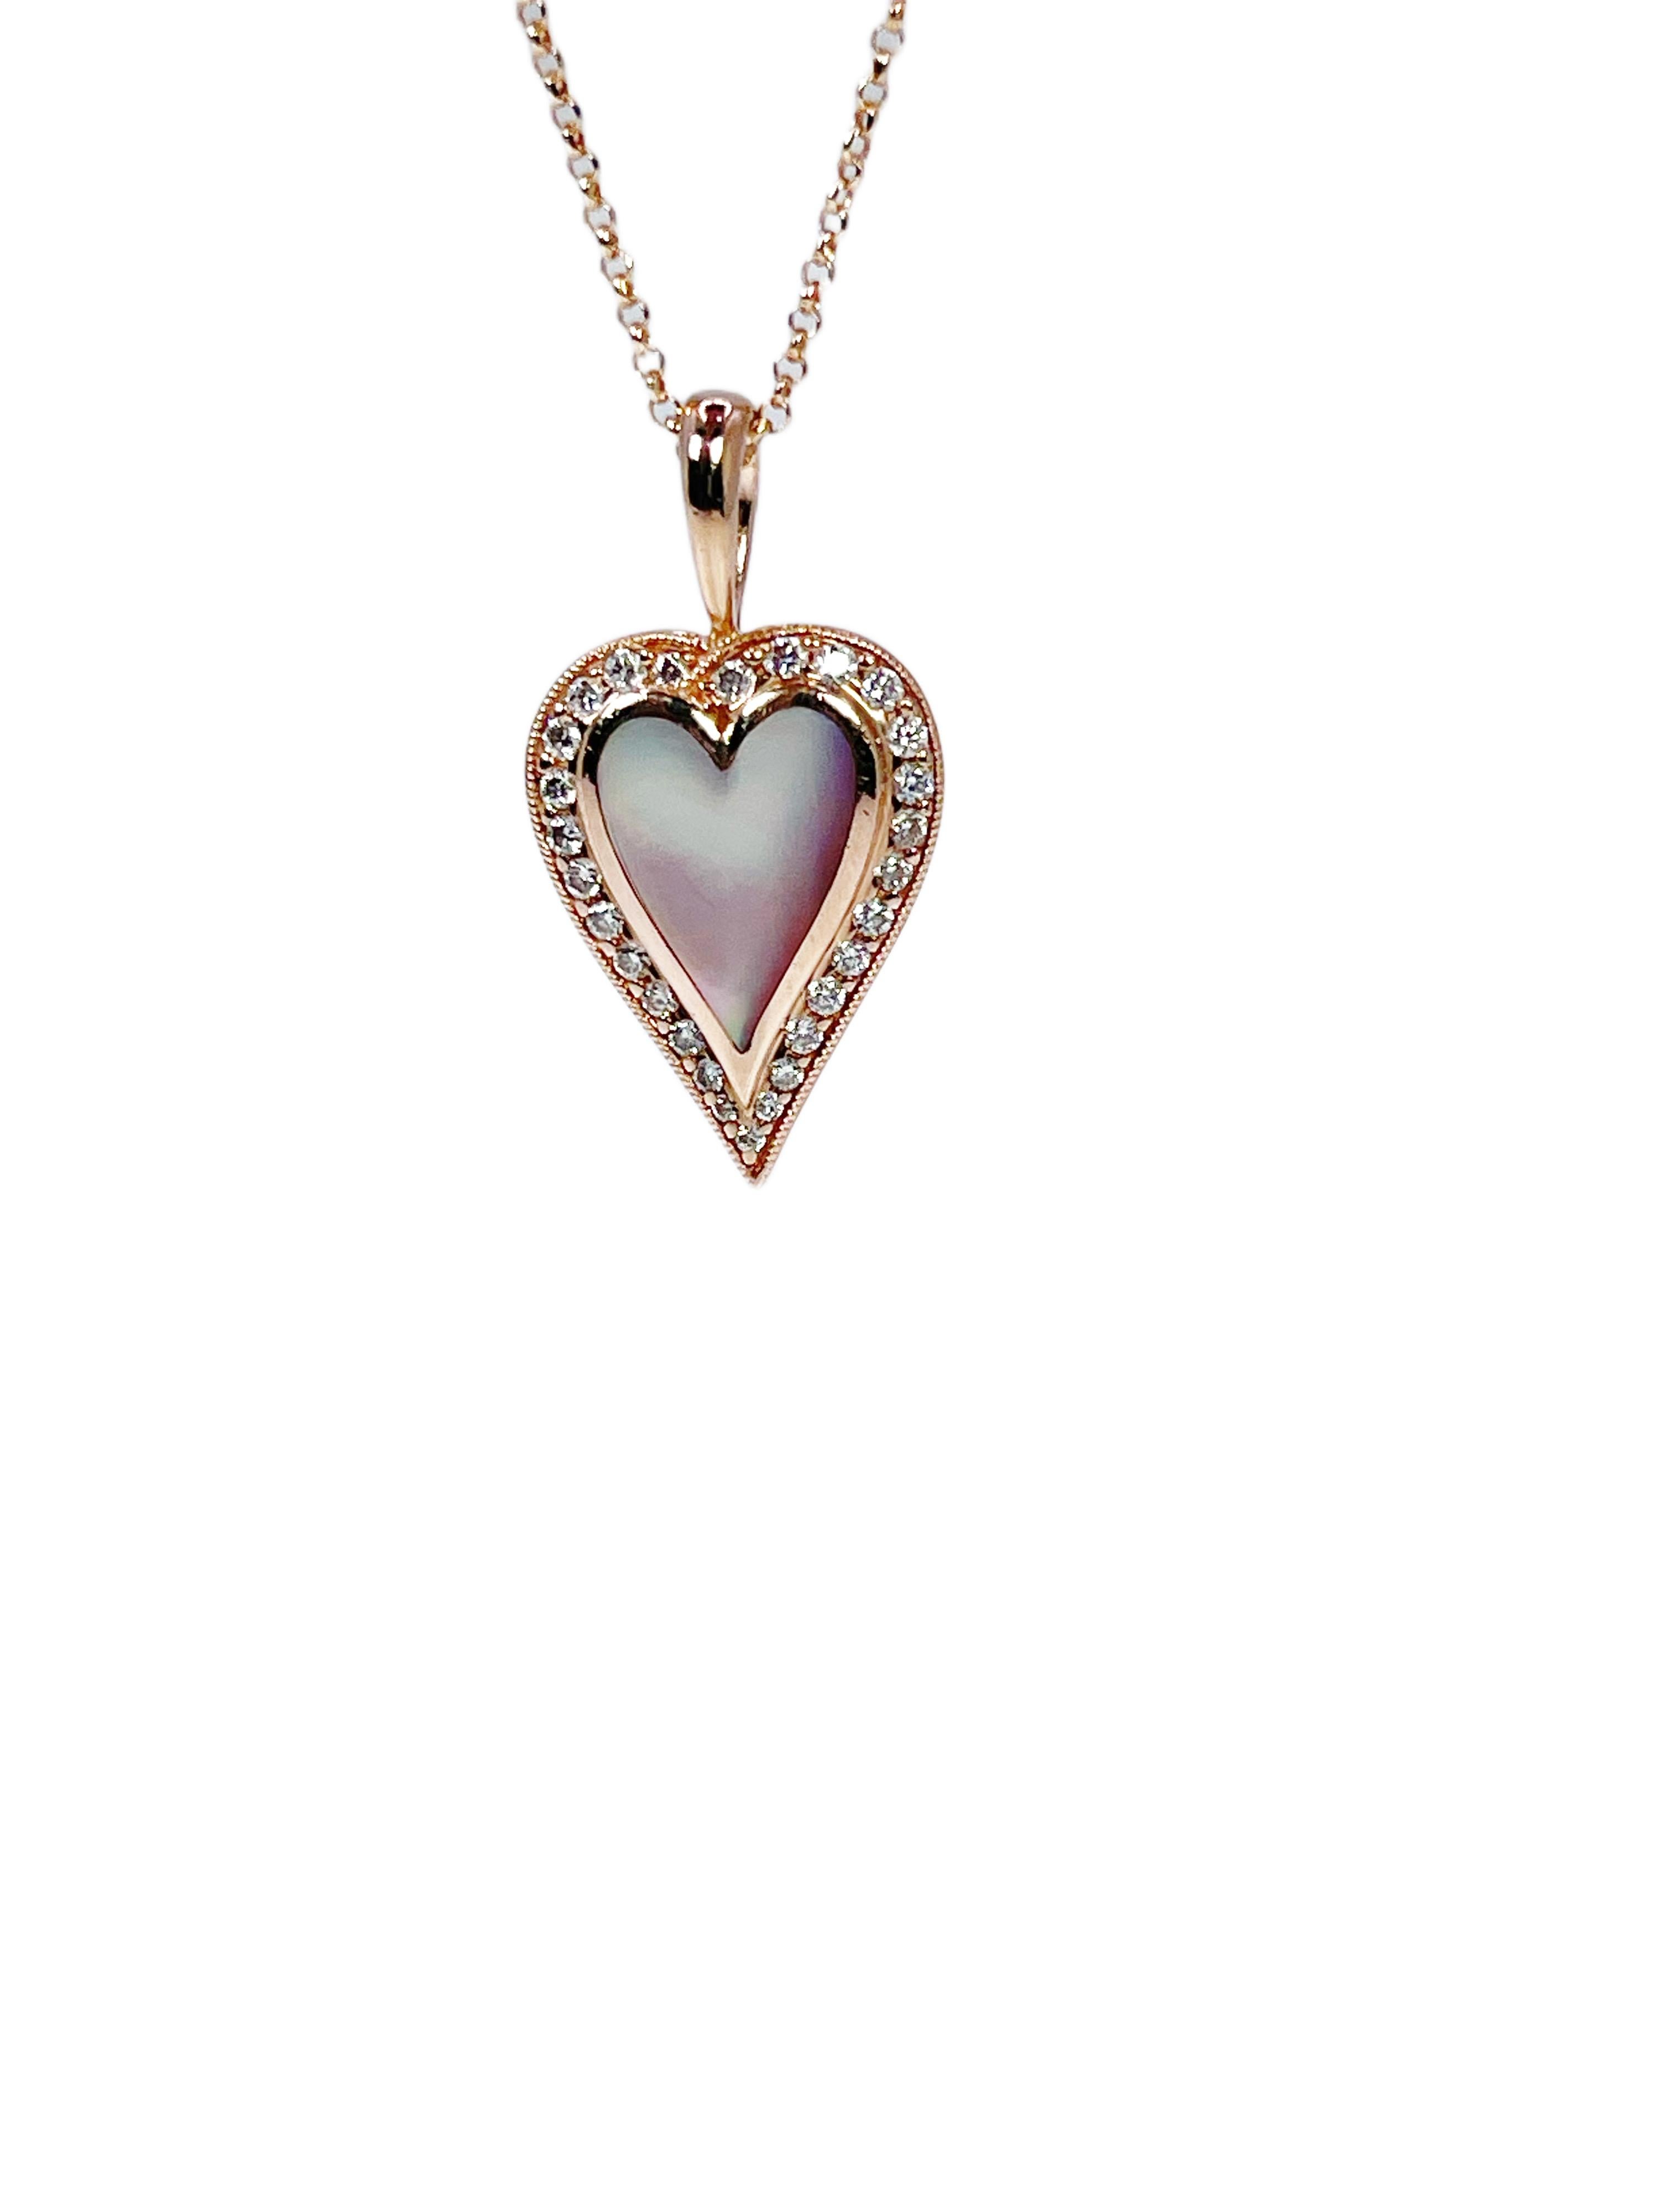 Kabana Designer heart pendant necklace made with VS diamonds in 14KT rose gold, center is mother of pearl.

GRAM WEIGHT: 4.51gr
GOLD: 14KT rose gold
SIZE: PENDANT (1INCHES LONG) NECKLACE-18